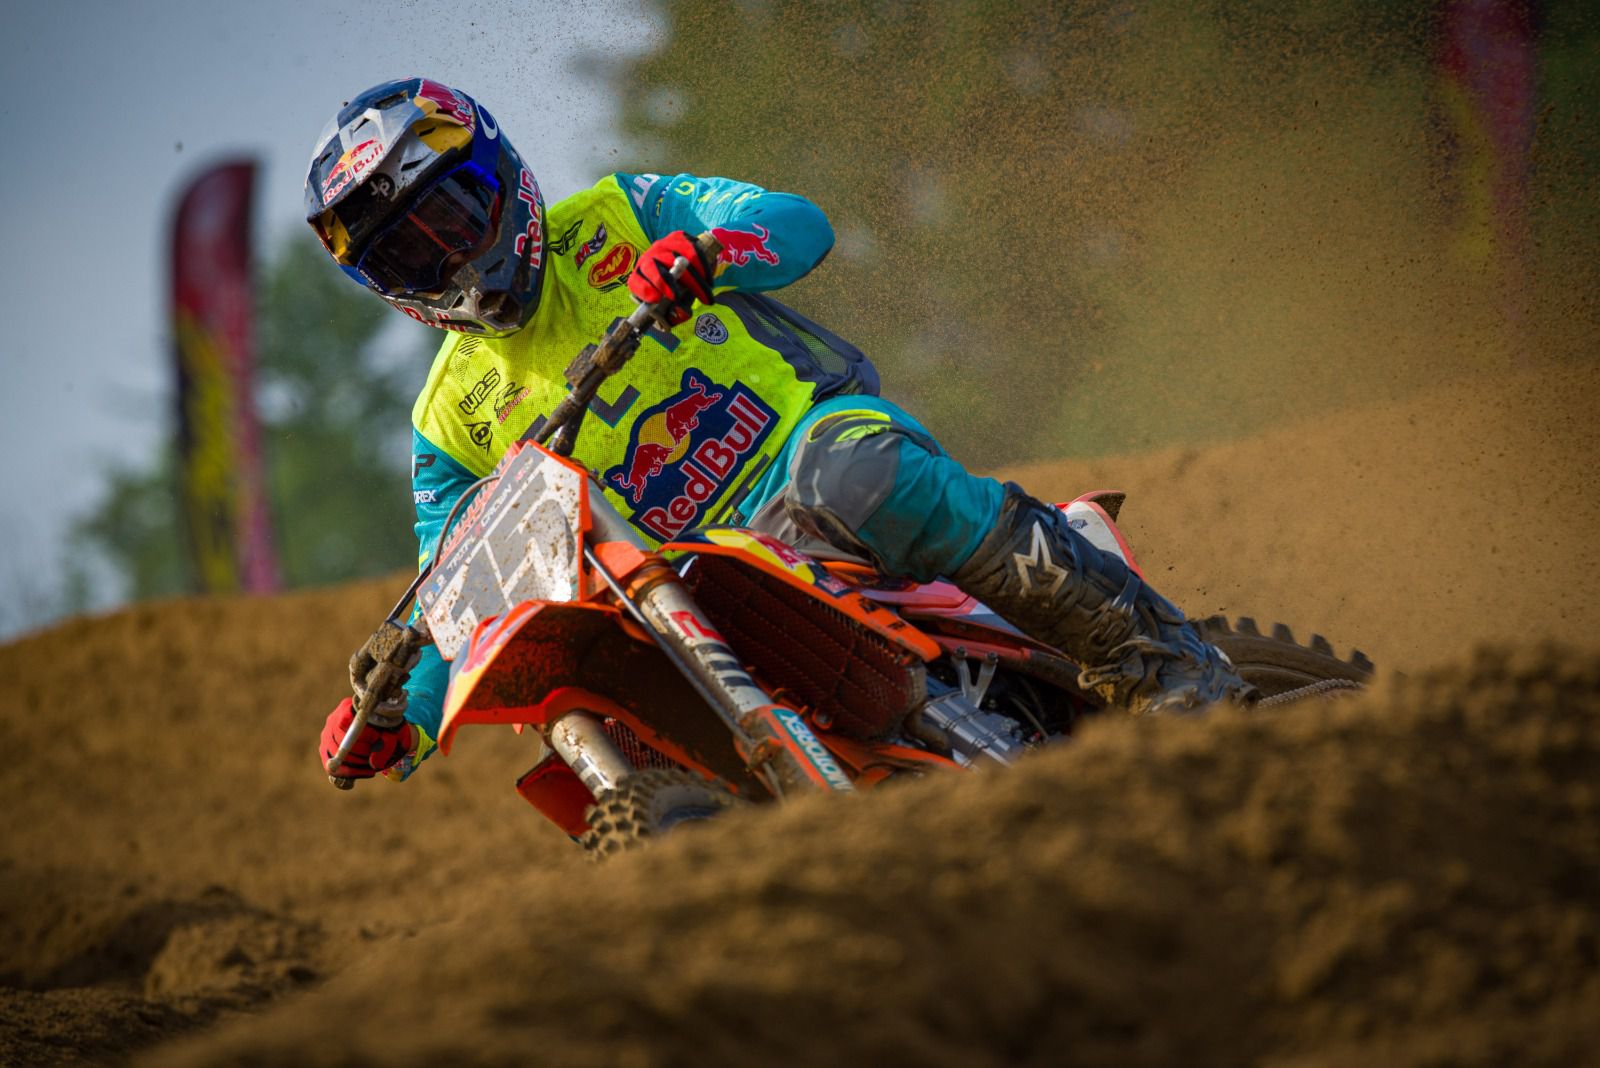 Jess Pettis had a strong showing on the day. James Lissimore/KTM